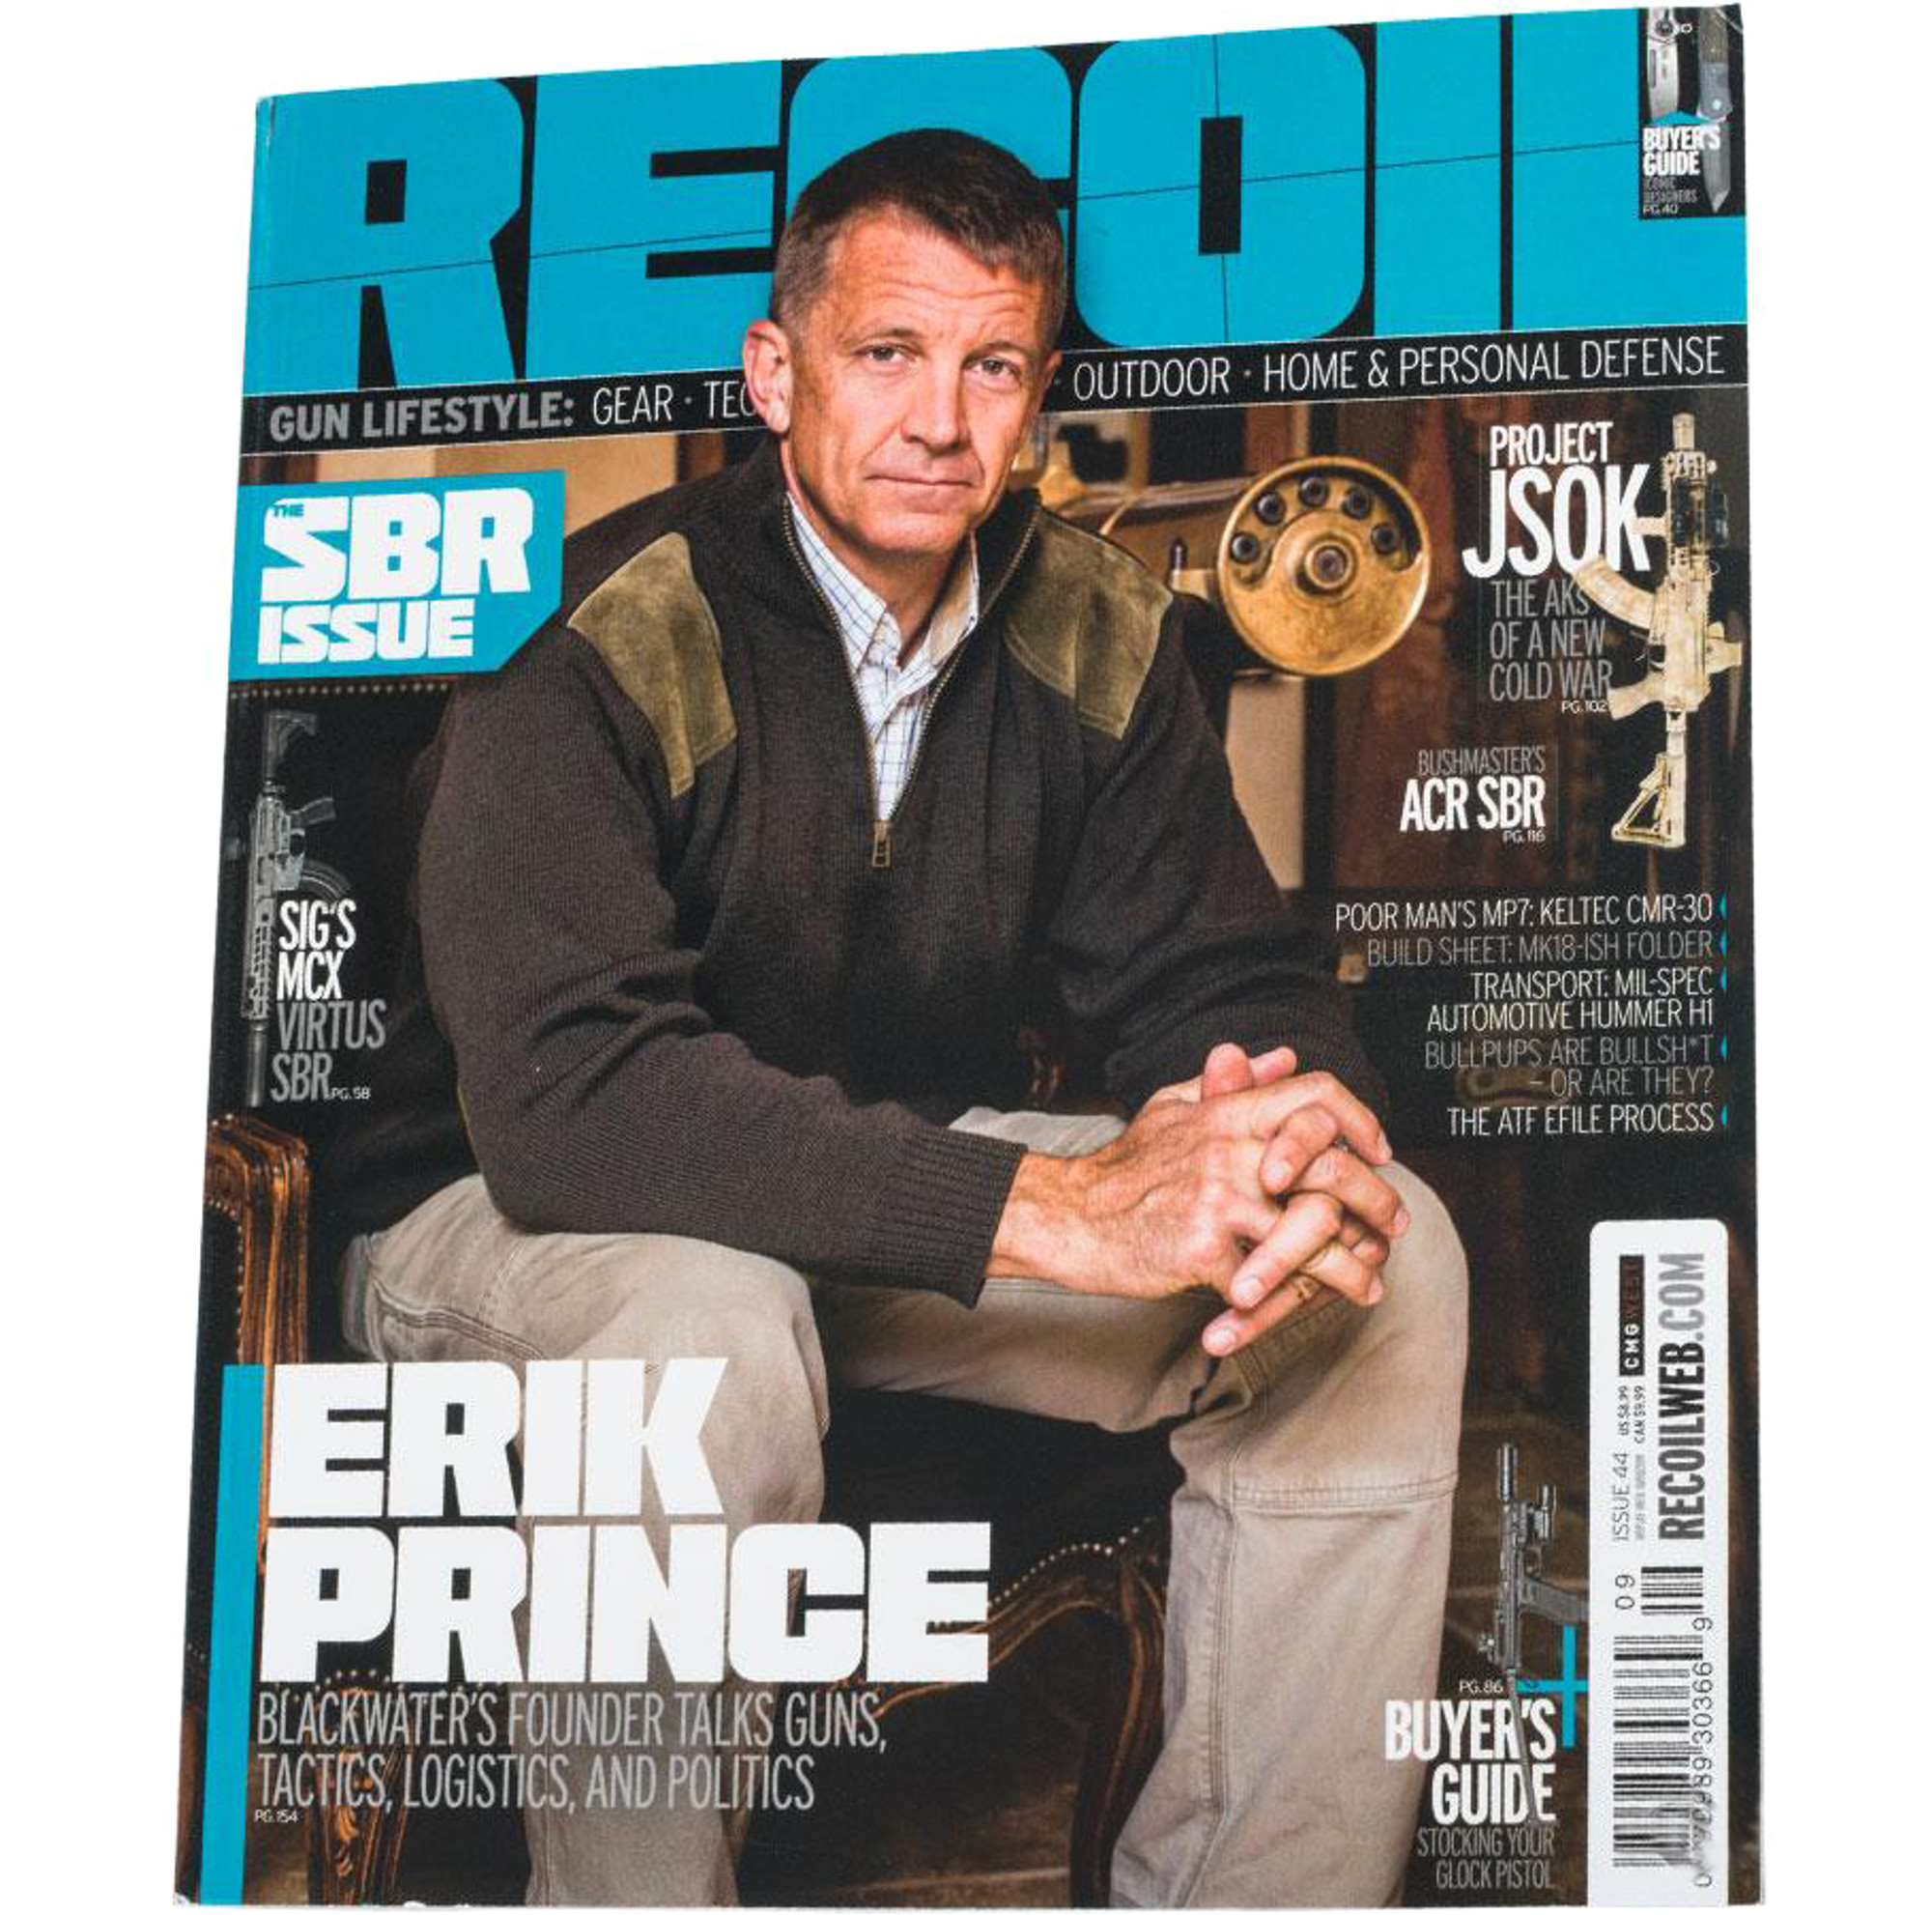 RECOIL Magazine (Issue: #44)